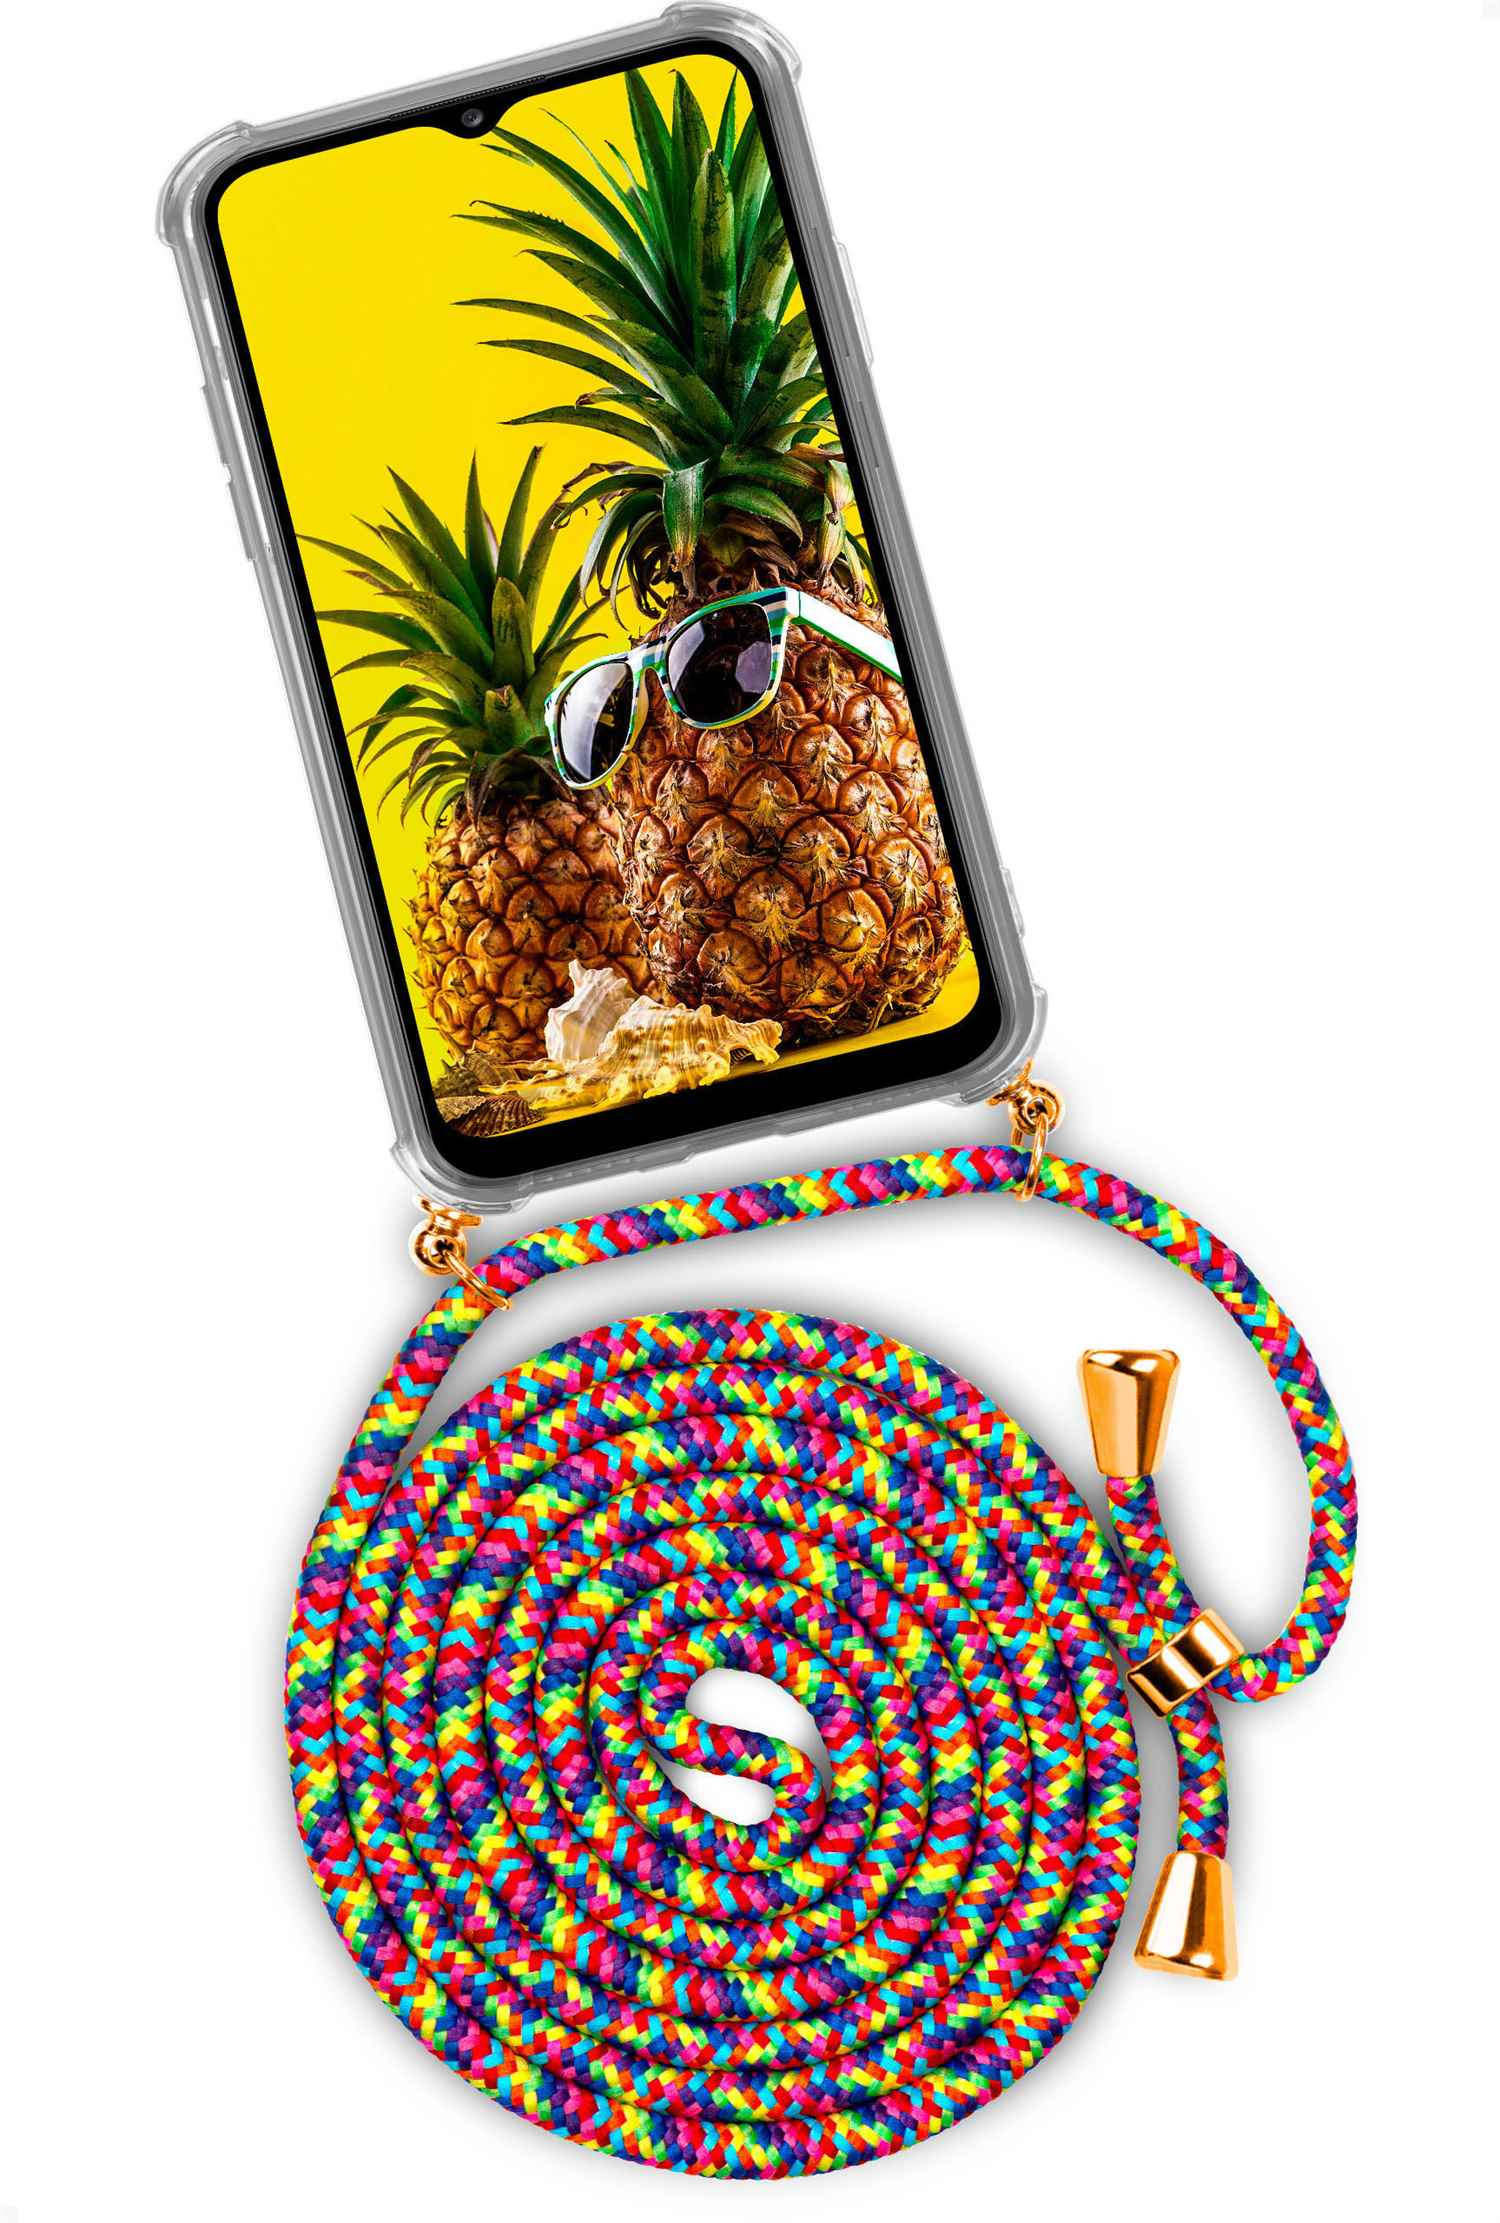 Friday Backcover, A12, Twist Fruity (Gold) ONEFLOW Case, Galaxy Samsung,